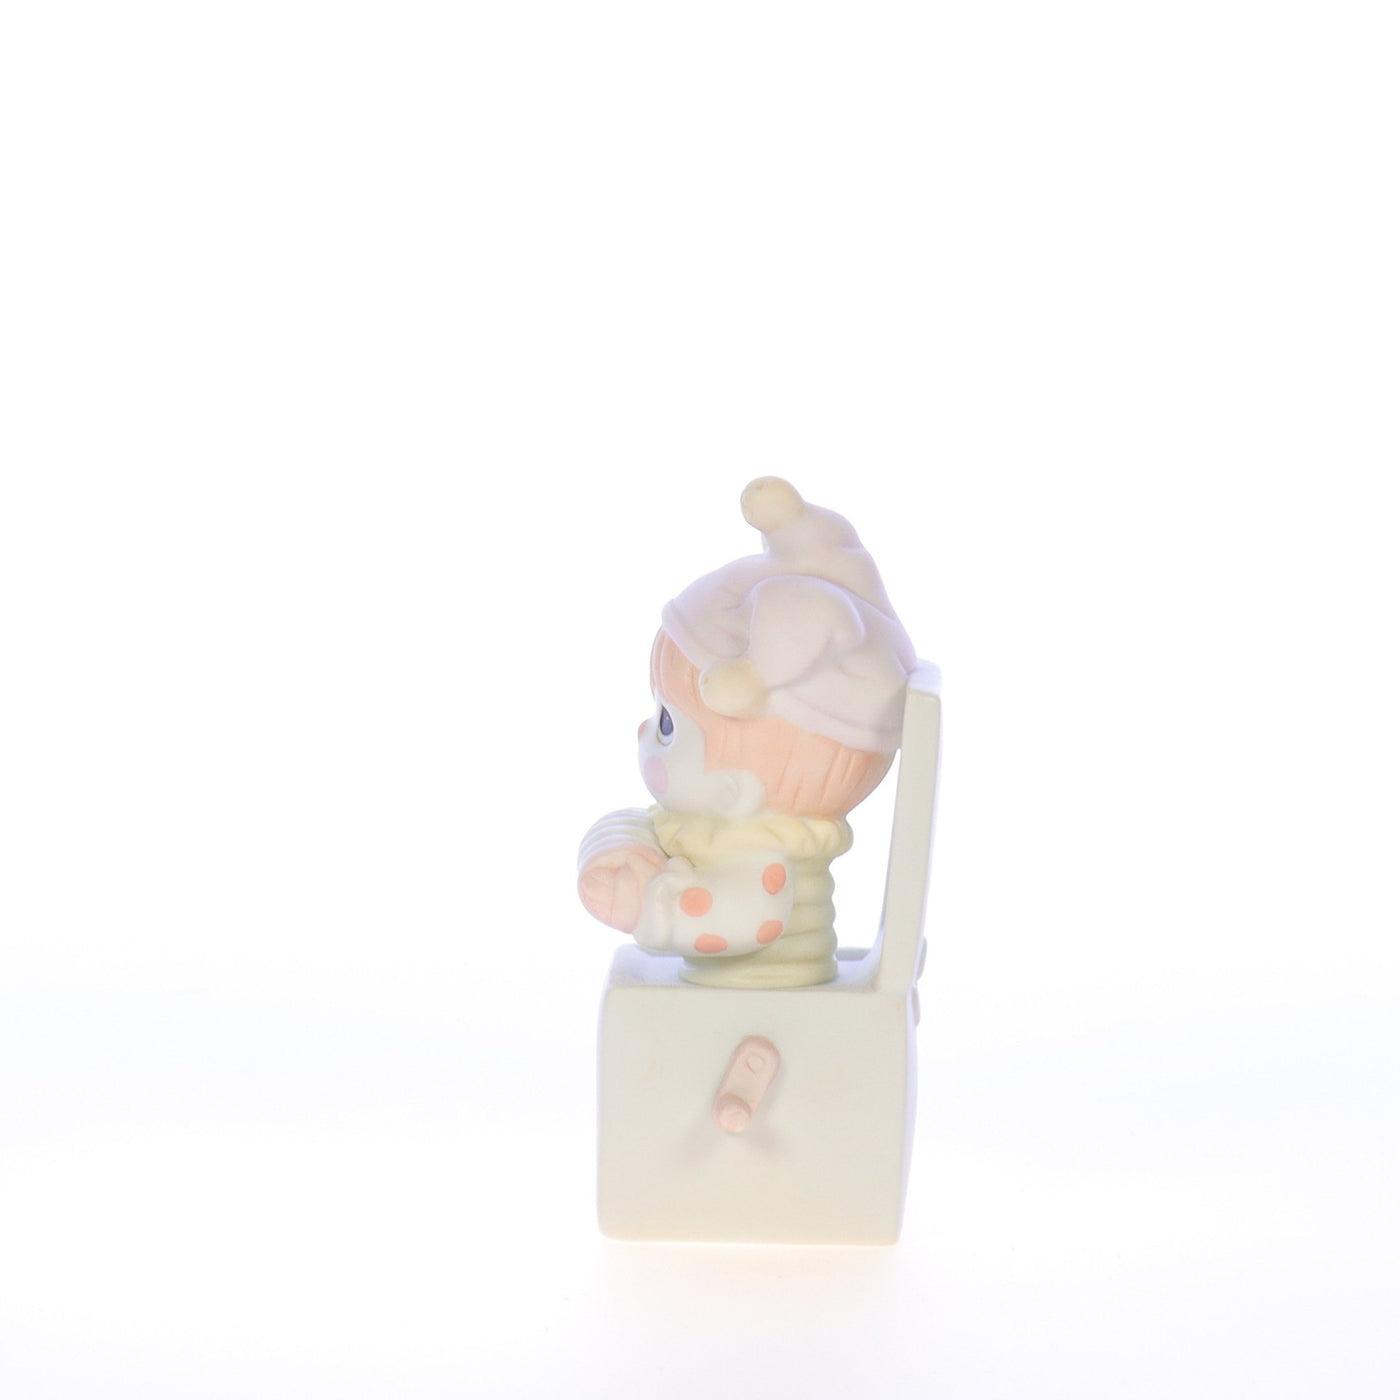 Precious_Moments_Porcelain_Figurine_Just_To_Let_You_Know_Youre_Tops_B0006_03